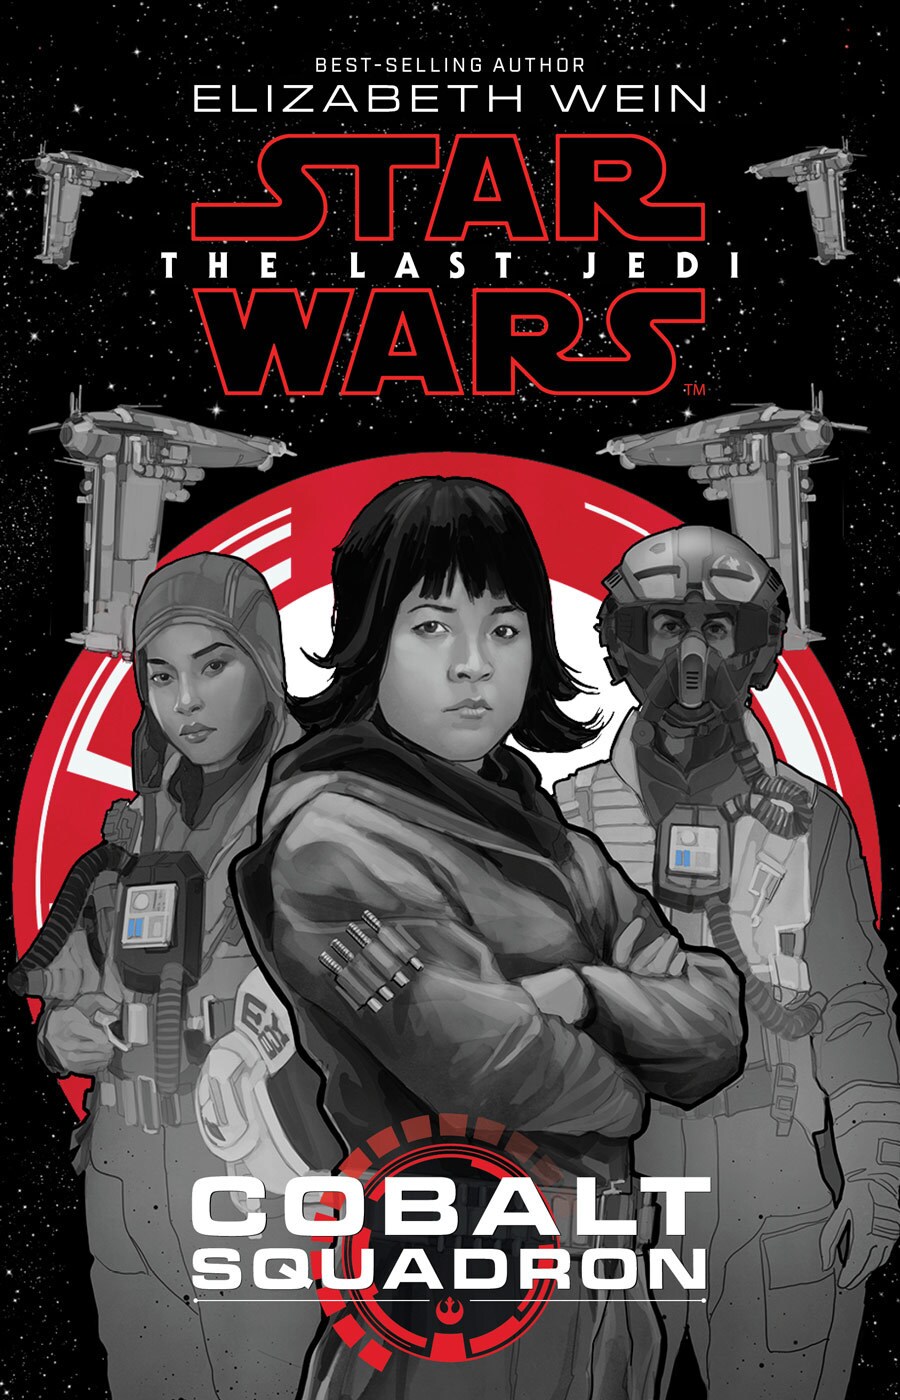 The cover of the book Star Wars: The Last Jedi: Colbat Squadron, by Elizabeth Wein, features Rose and Paige Tico with Nix Jerd.